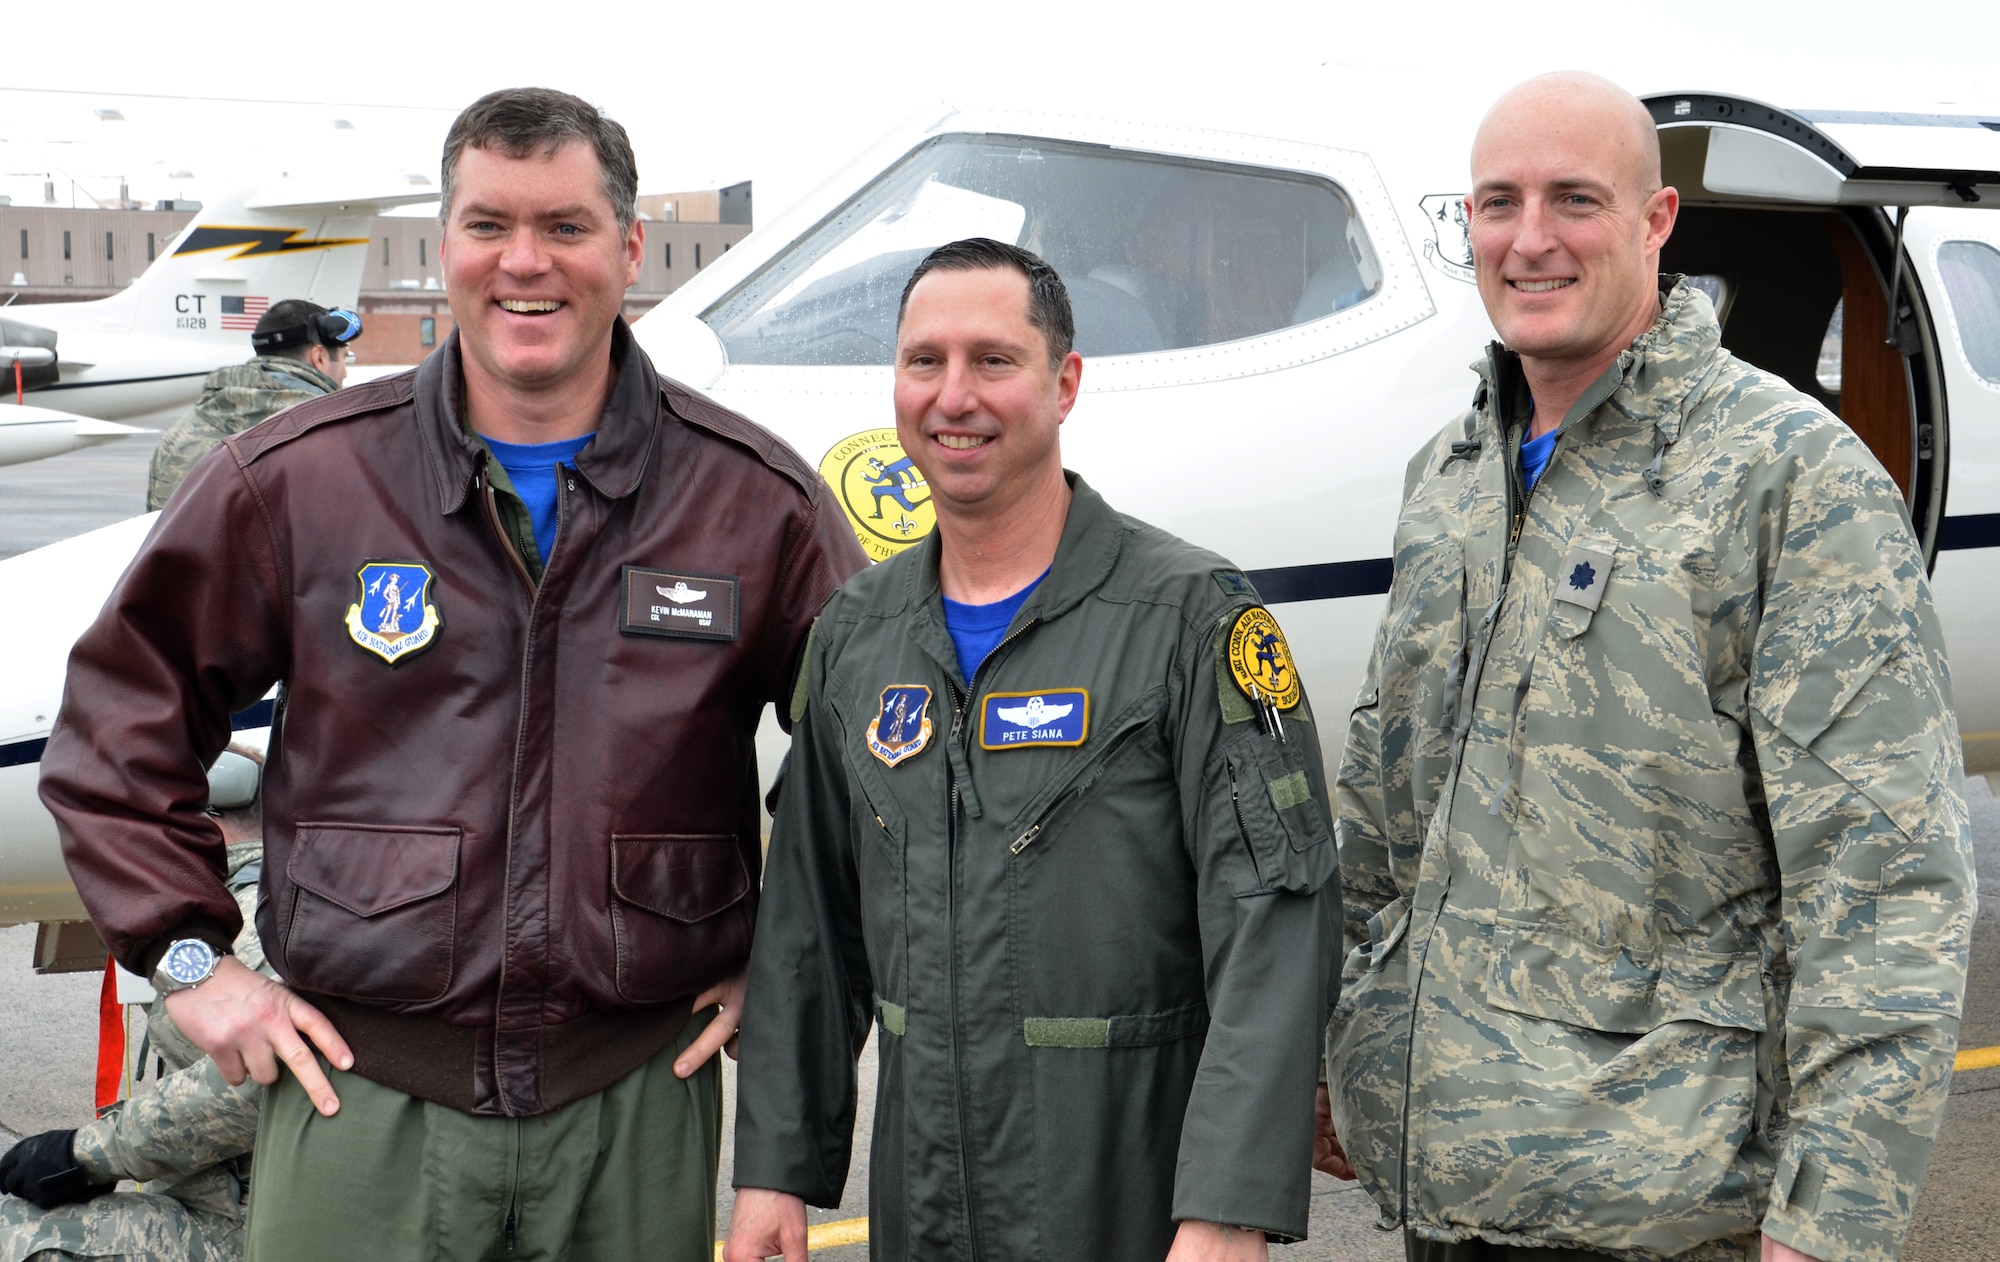 Col. Pete “Meat” Siana stands with two of his longtime friends who flew with him during his “fini-flight” March 3, 2012, at Bradley Air National Guard Base, East Granby, Conn.  Col. Kevin “Sloth” McManaman (left) and Lt. Col. Kenneth “Tuna” LaTona have known Siana for the better part of his military career. (U.S. Air Force photo by Tech. Sgt. Joshua Mead)